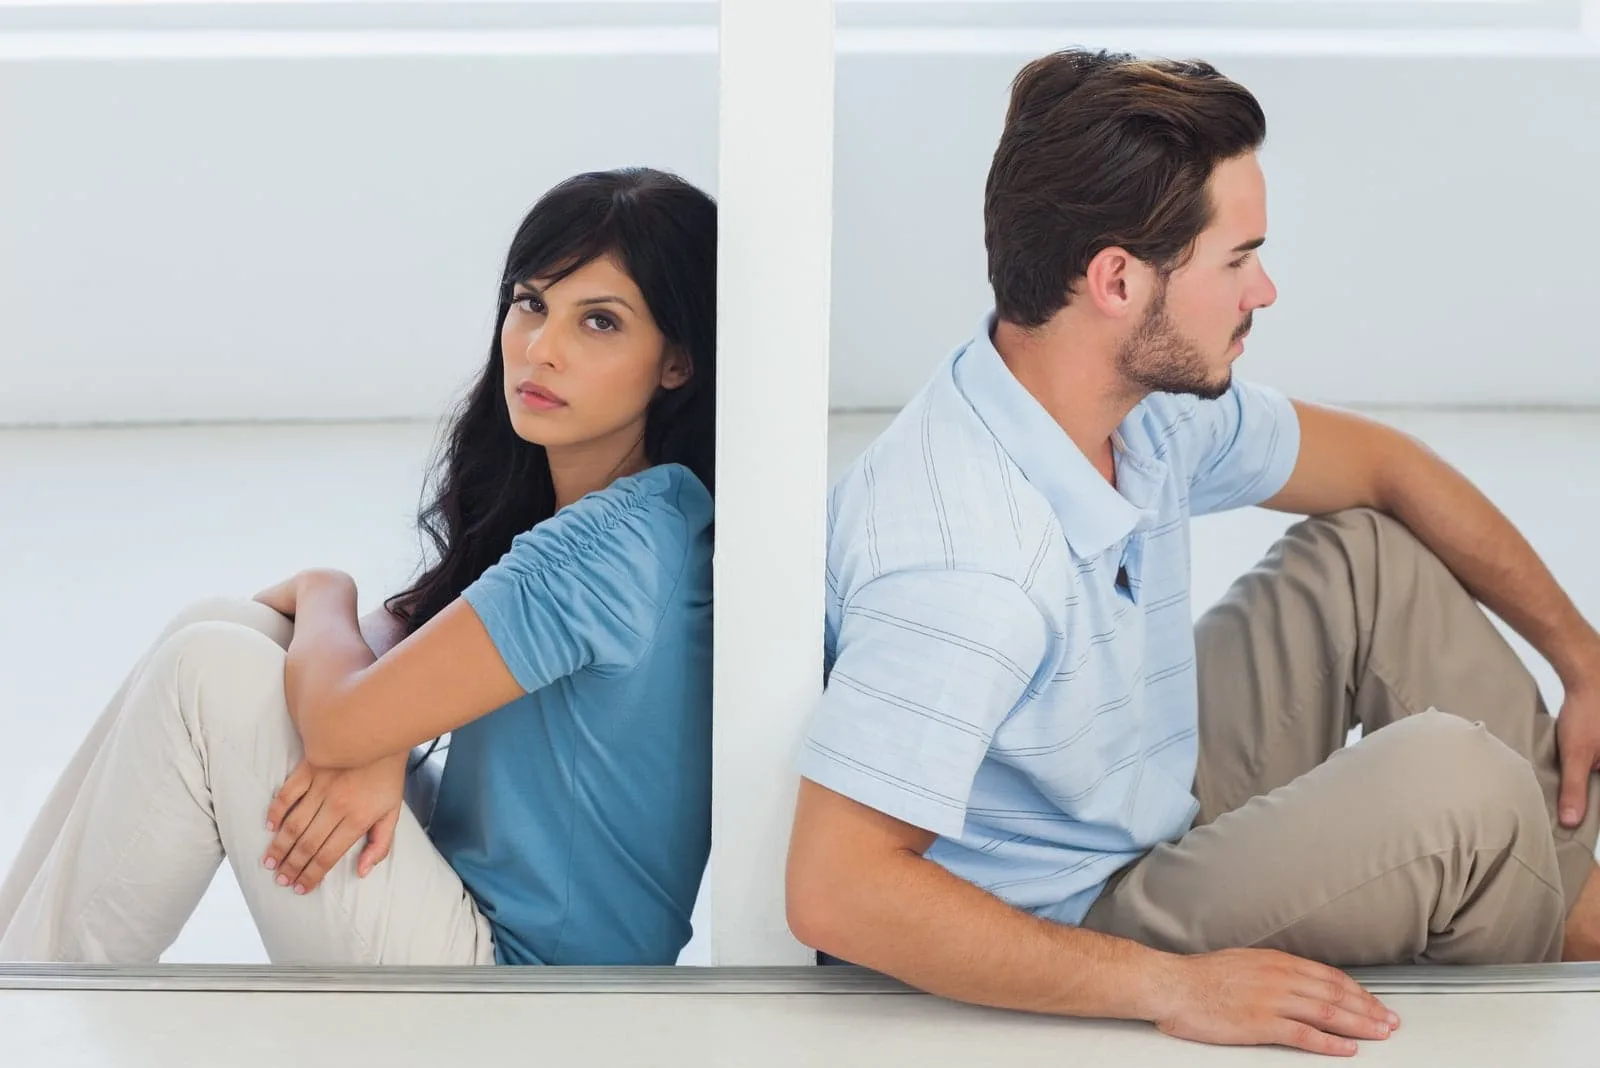 Sitting couple are separated by wall with woman